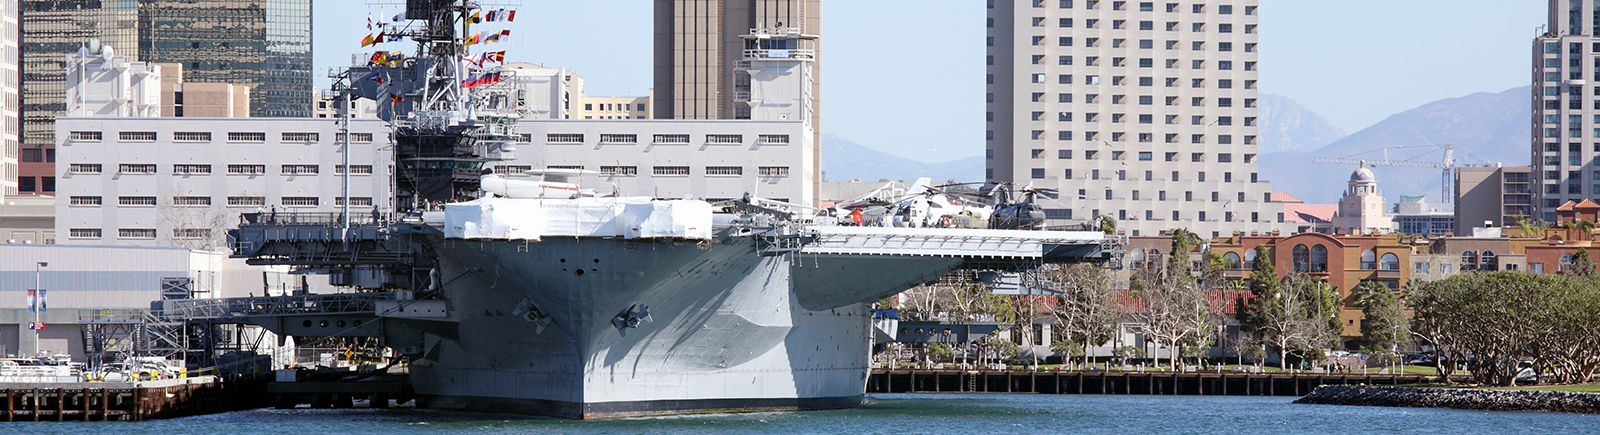 California Hotel USS Midway Museum